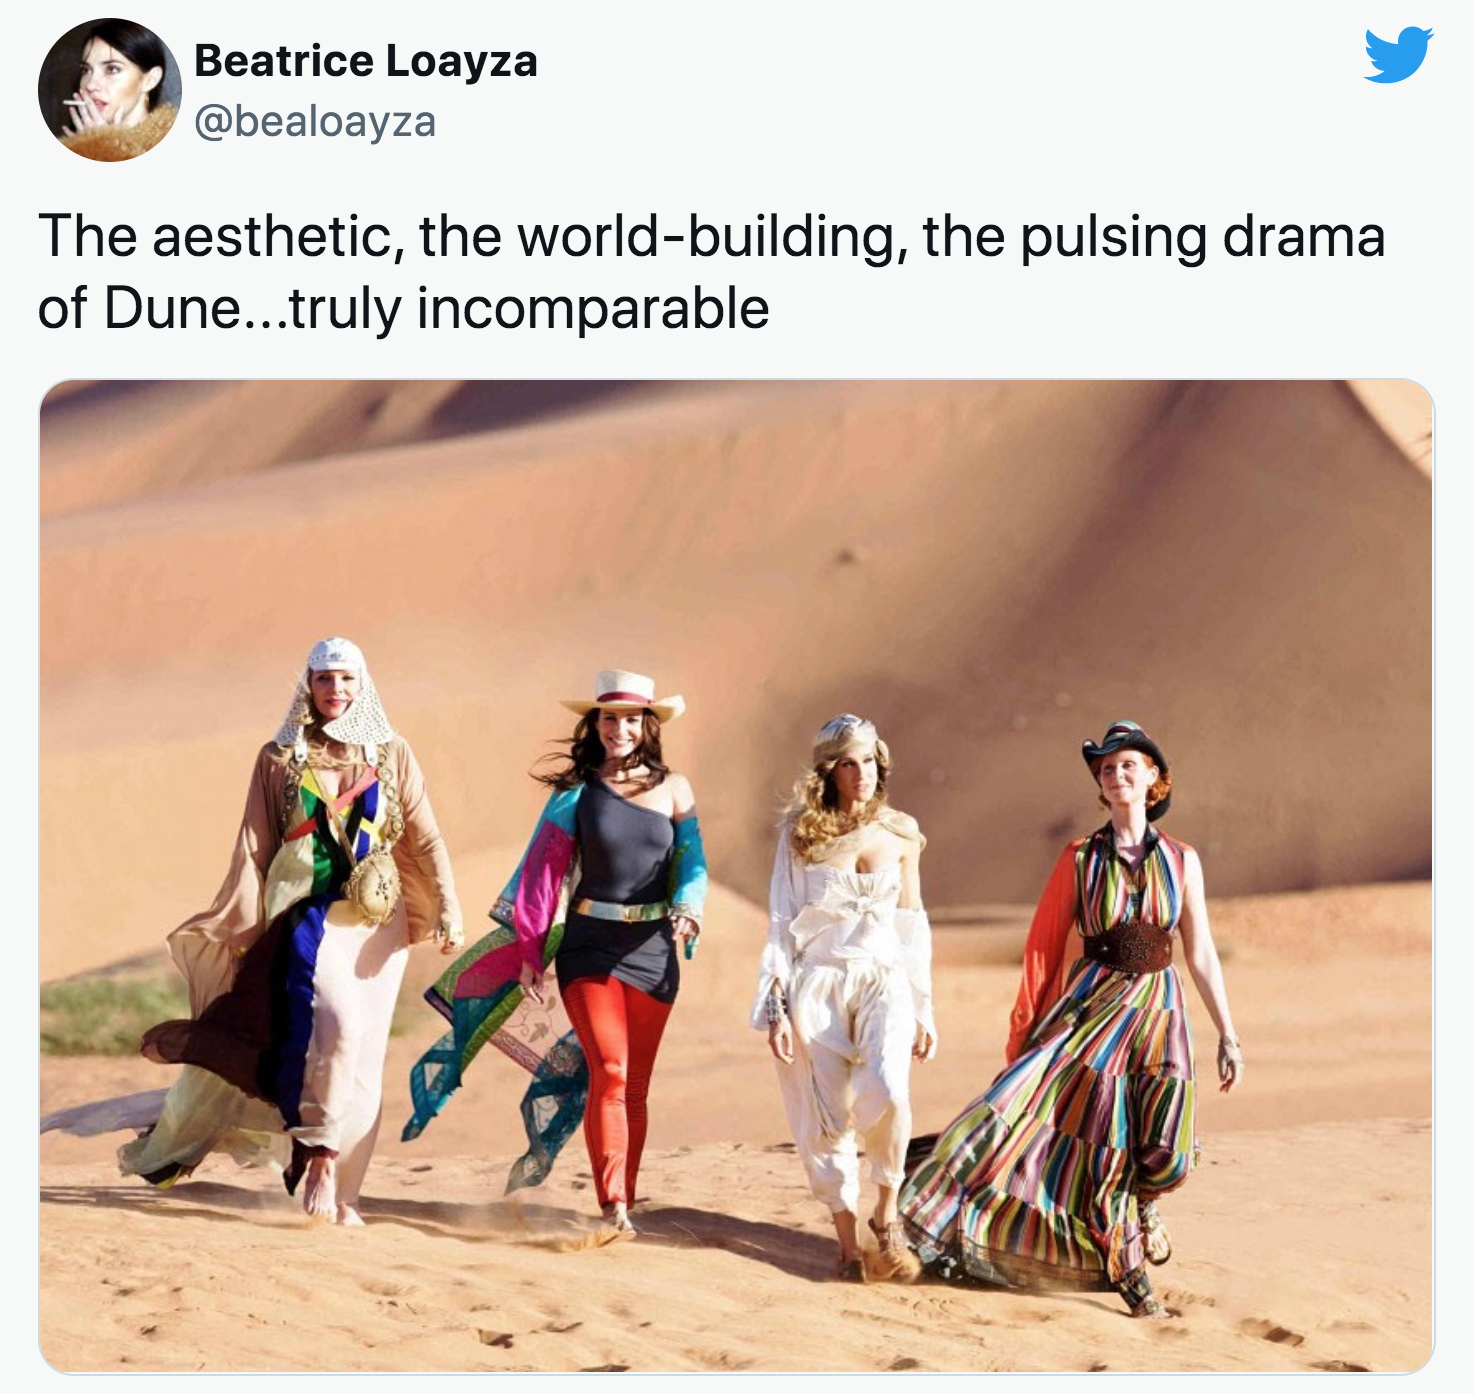 dune memes  - city 2 - Beatrice Loayza The aesthetic, the worldbuilding, the pulsing drama of Dune...truly incomparable